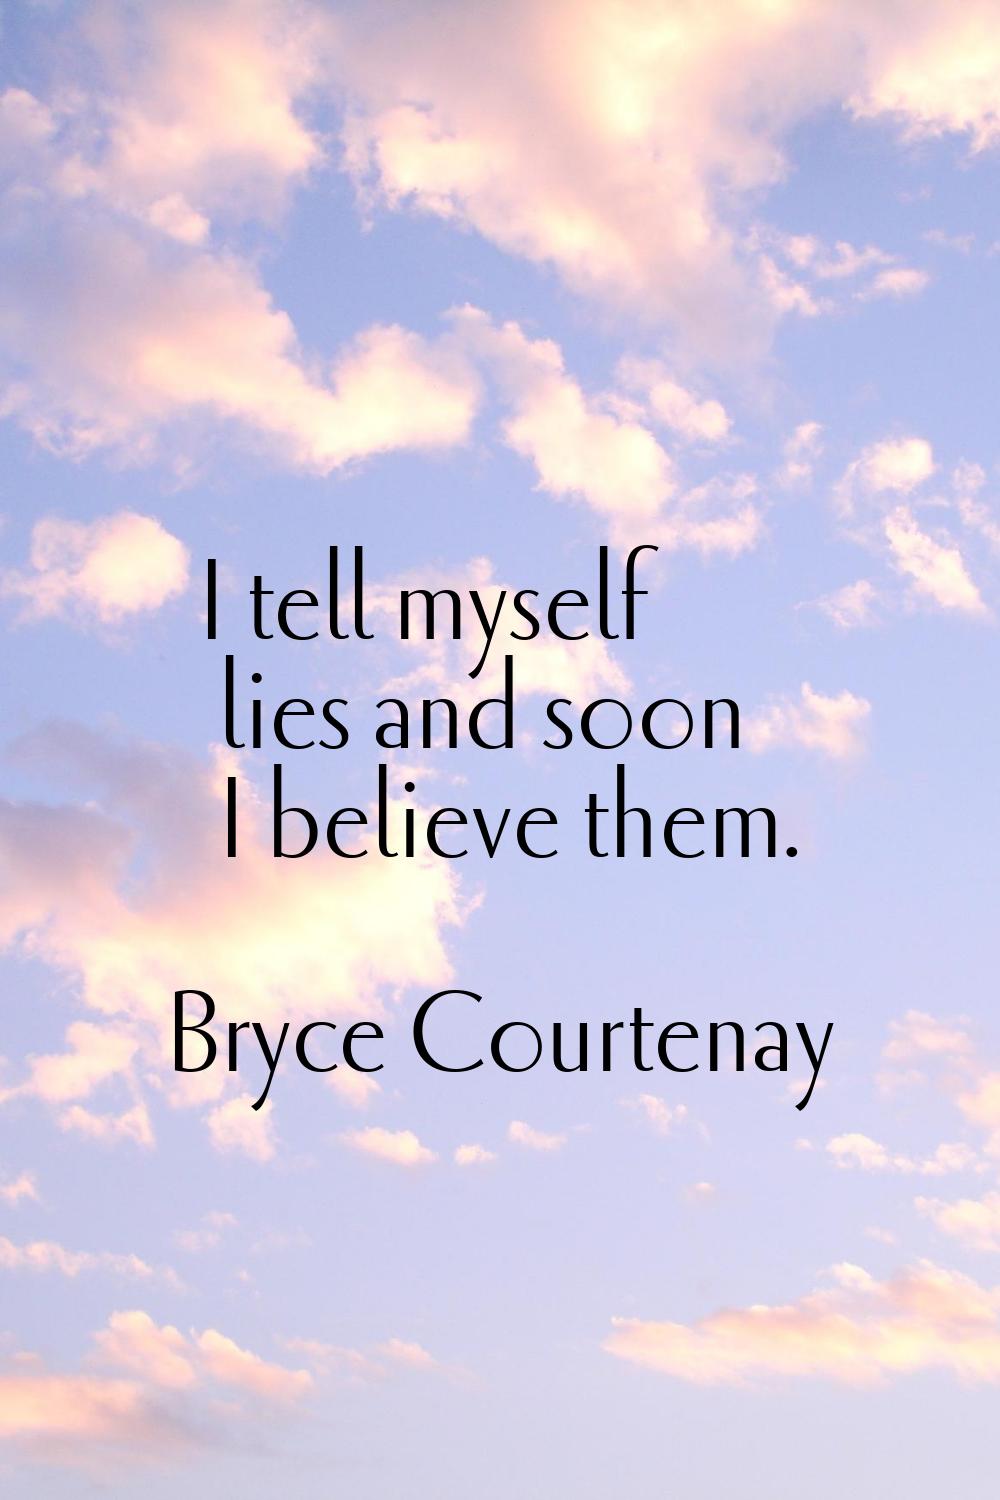 I tell myself lies and soon I believe them.